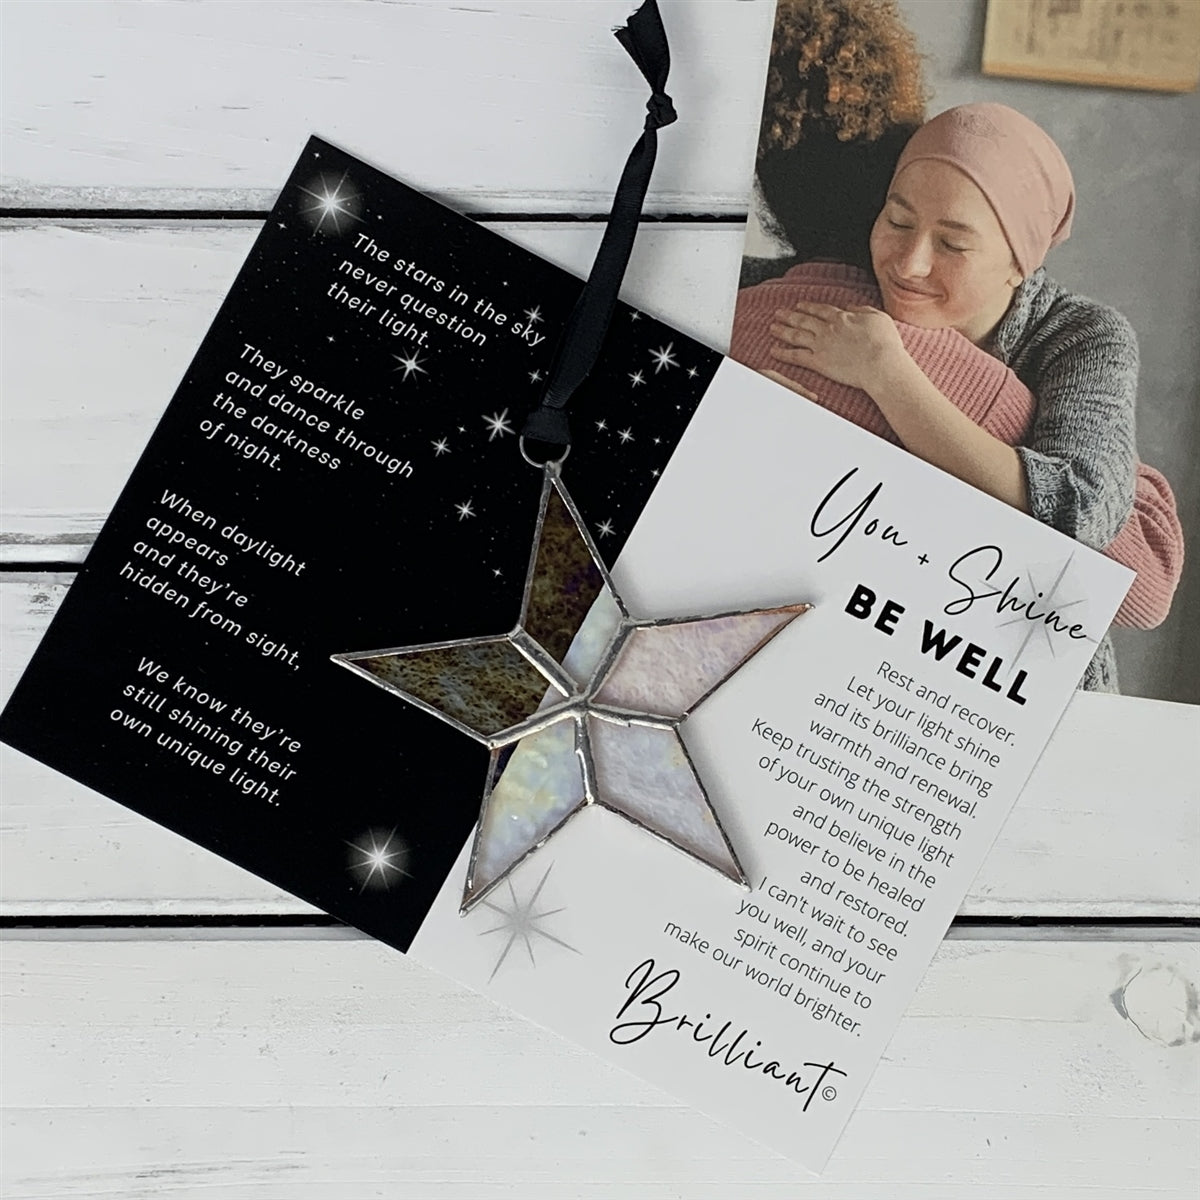 Be Well star and artwork with the &quot;You + Shine&quot; poem on the left side and the &quot;Be Well&quot; sentiment on the right side.